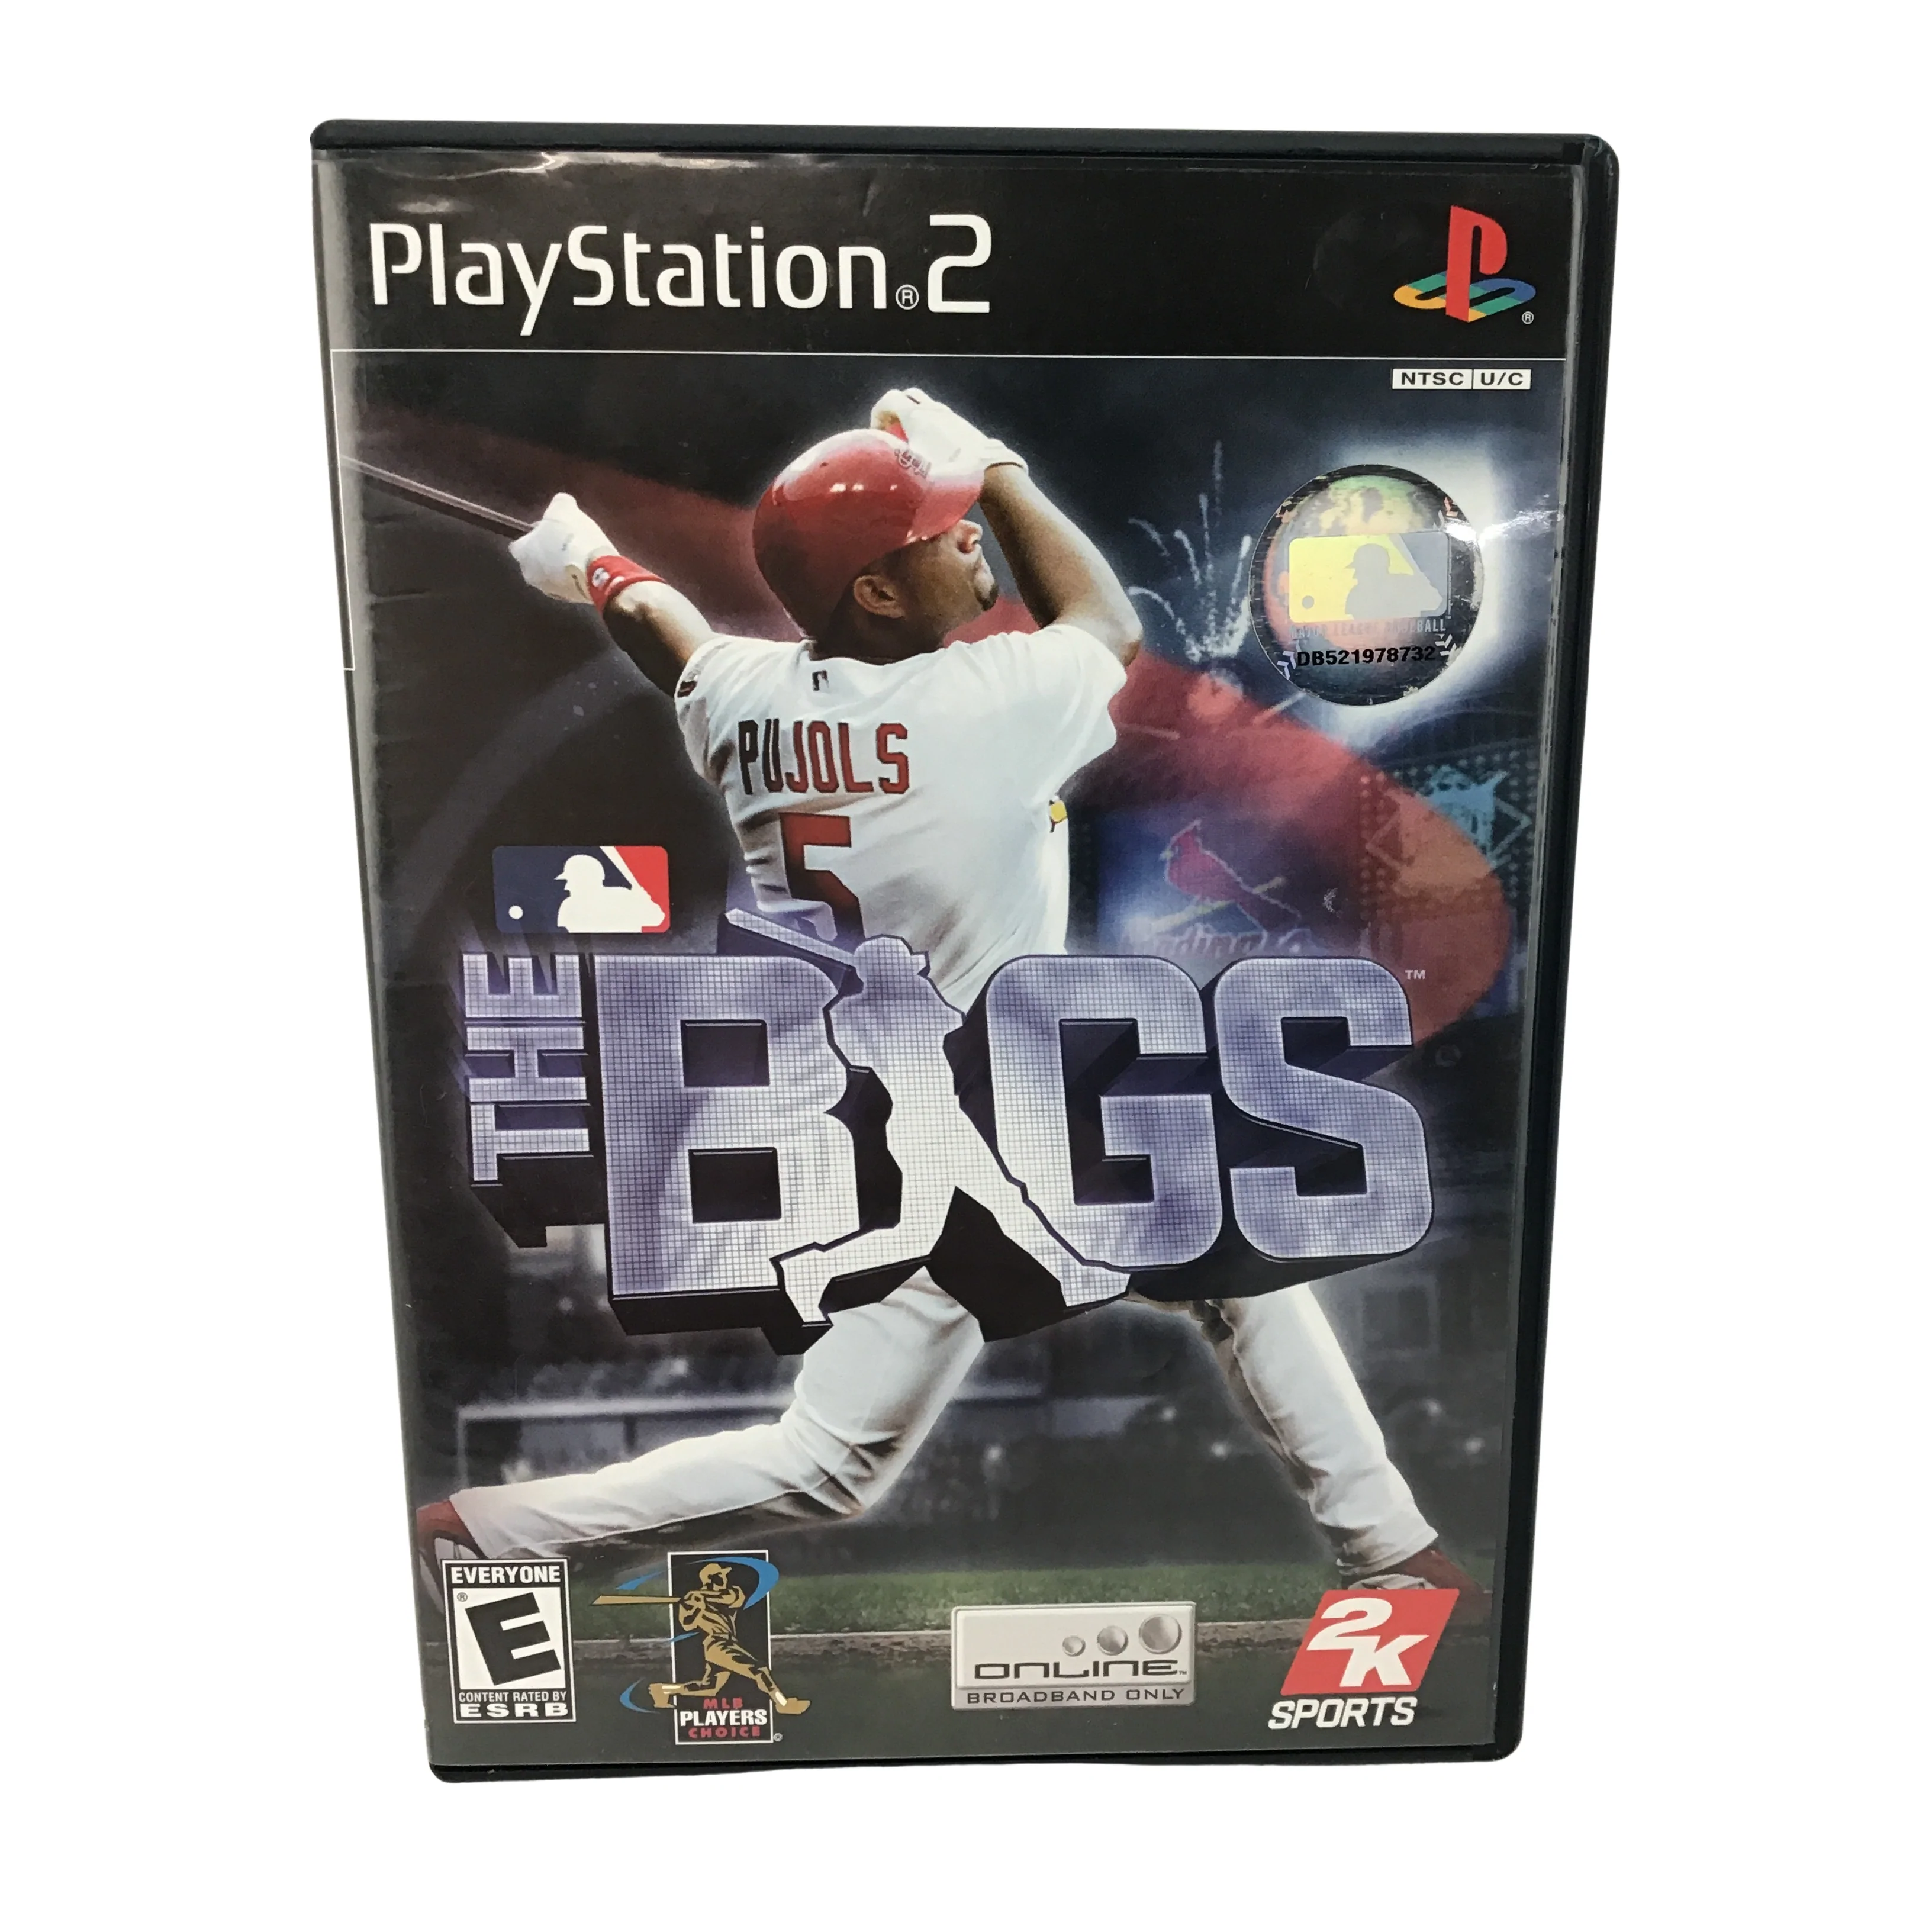 PlayStation 2: The Bigs Game / Video Game**USED**